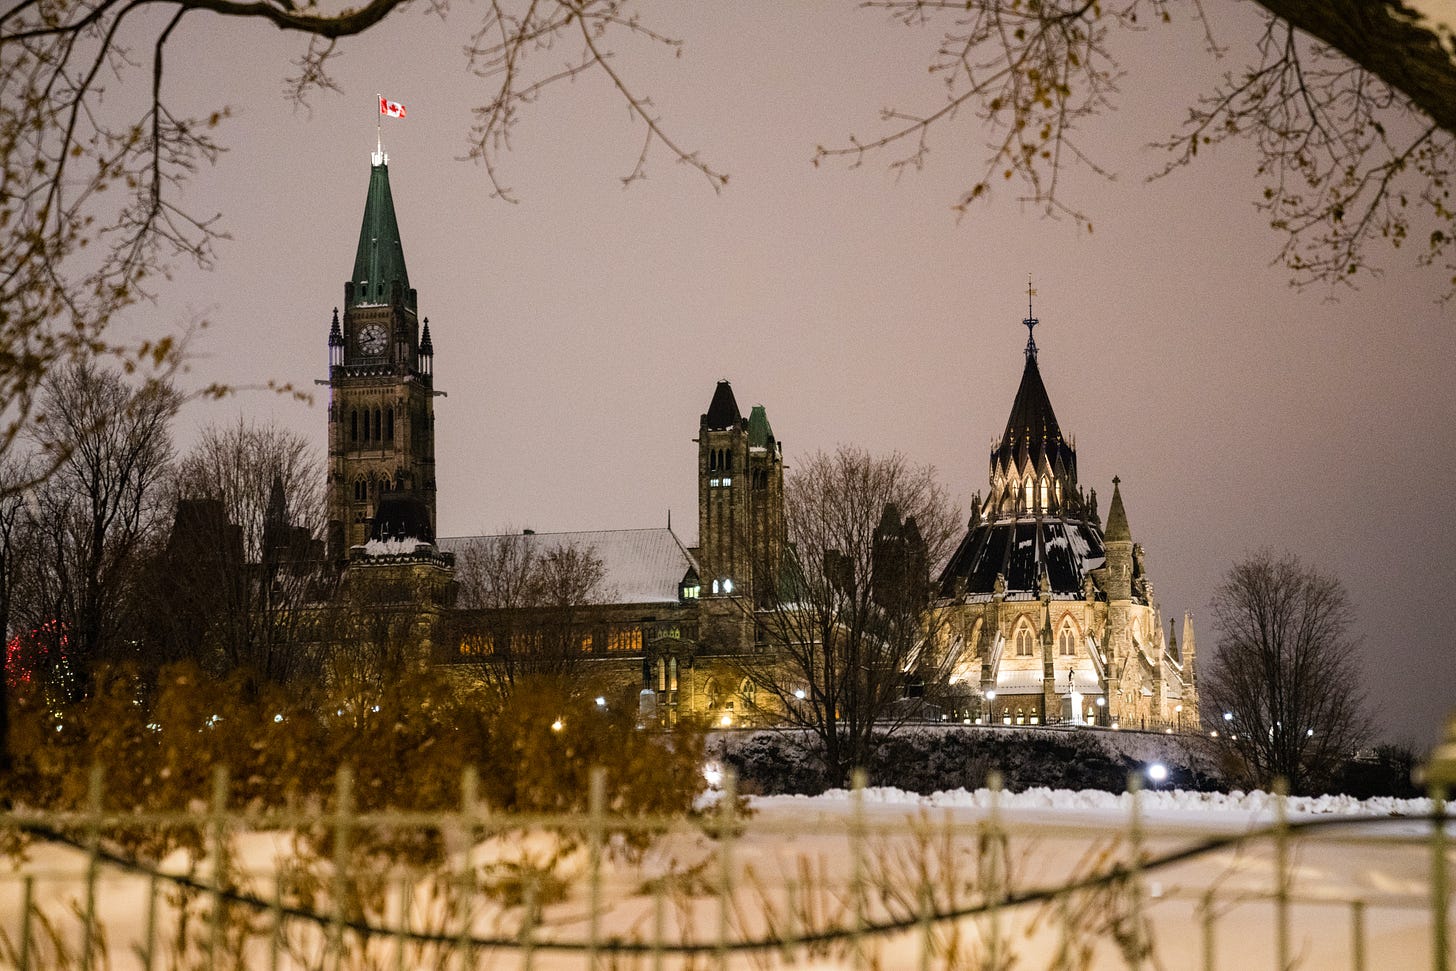 Parliament Hill seen from a distance, framed by trees with snow in the foreground and the Peace Tower and Library of Parliament in the distance.